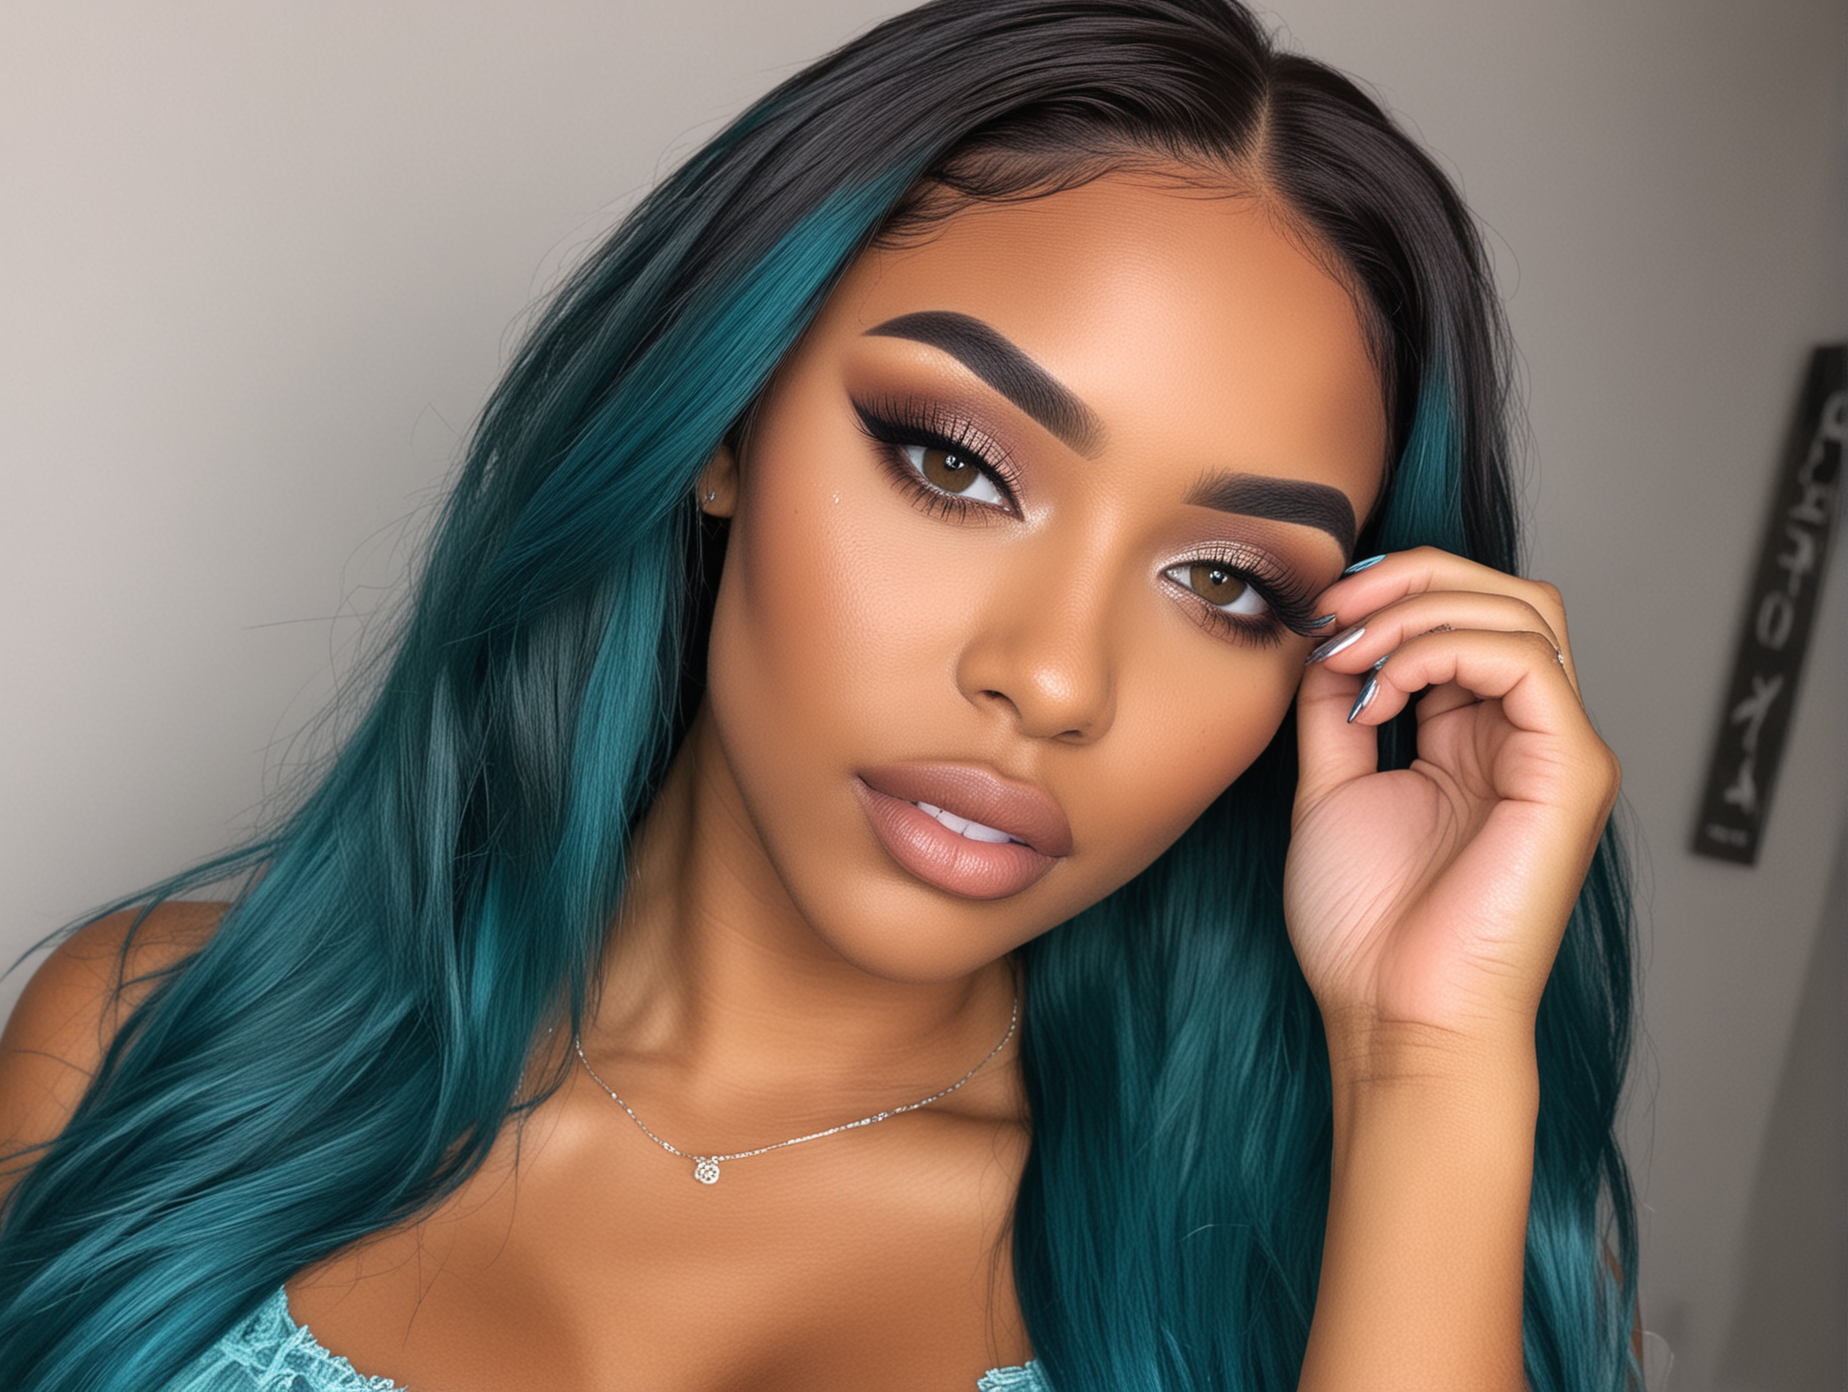 Stylish Black Woman with Teal Eyebrows and Blue Green Wig